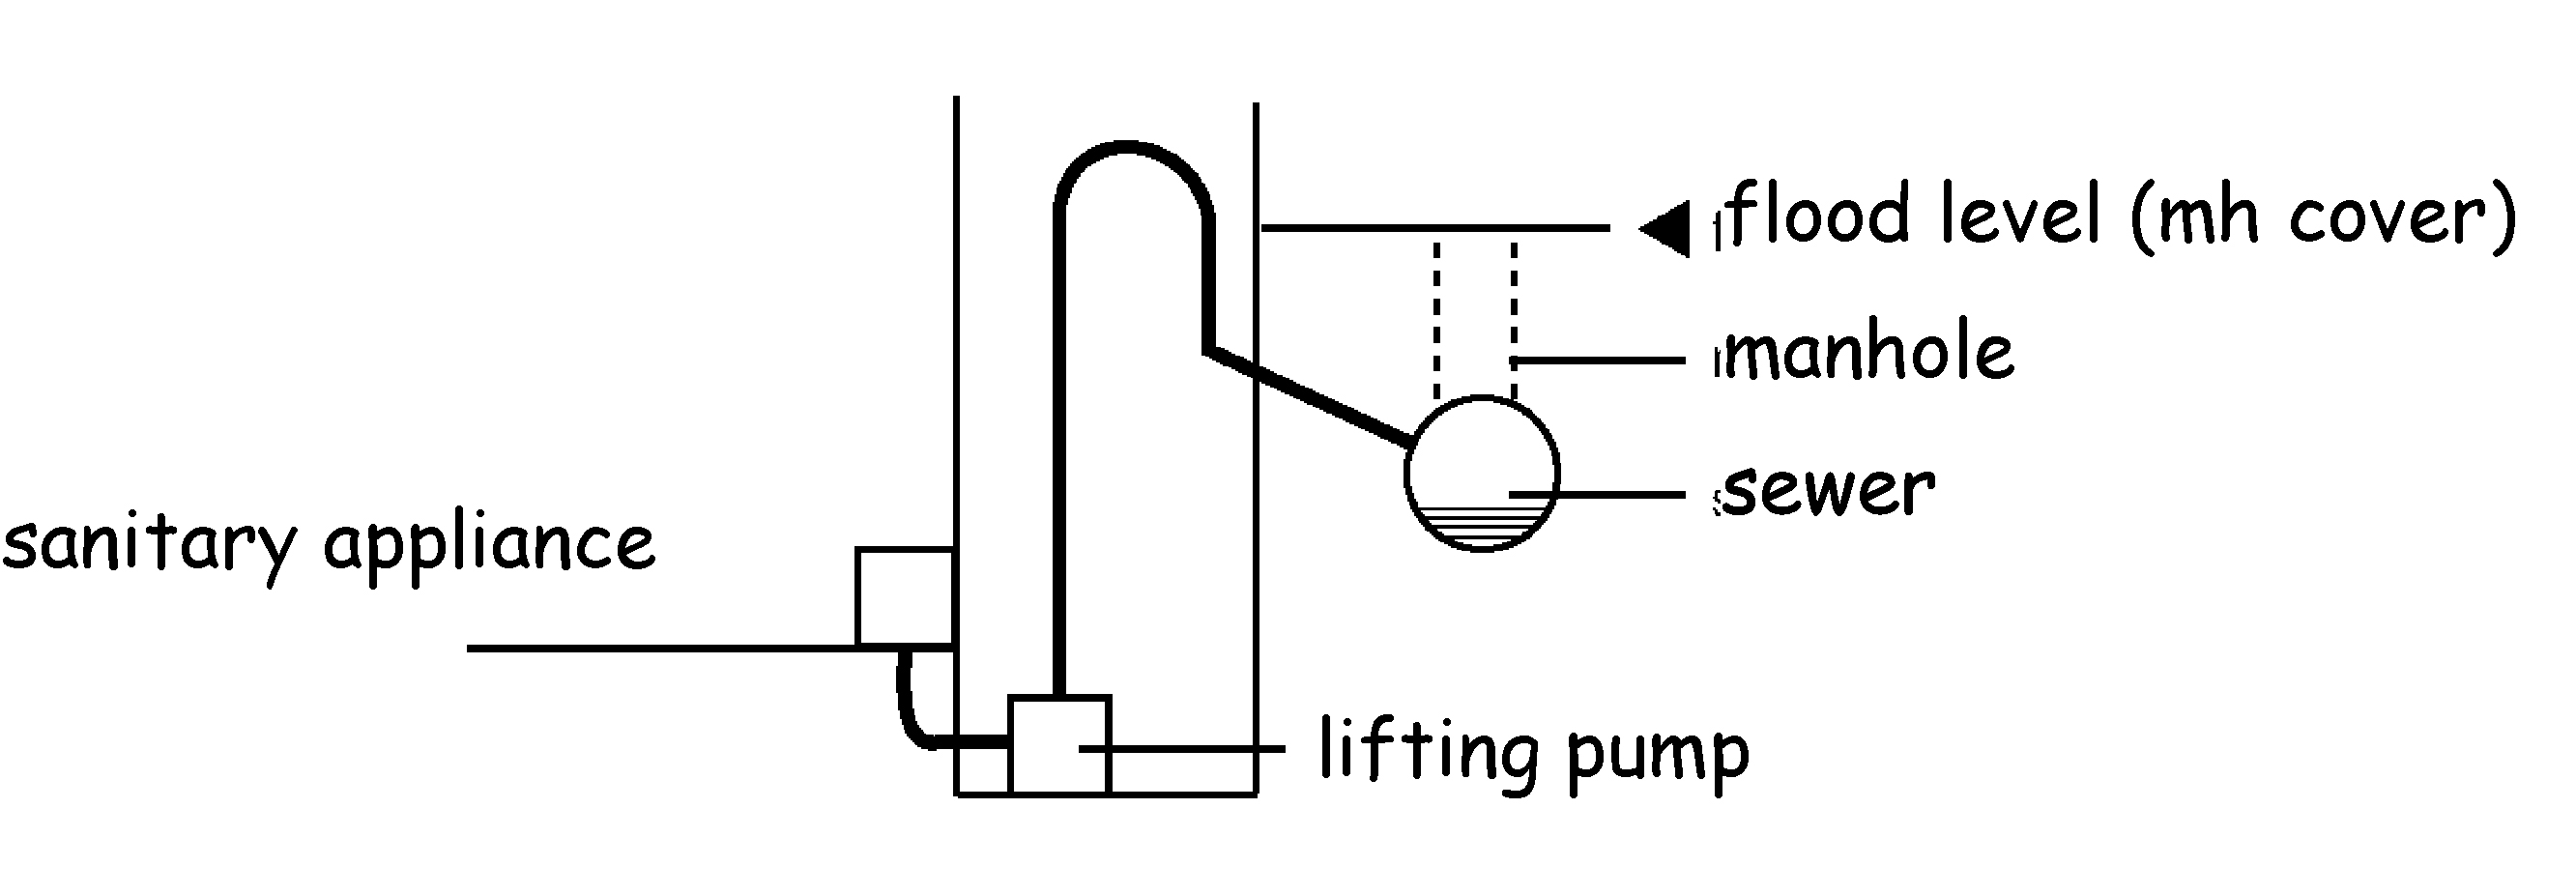 Diagrammatic section through a pumped system in a basement